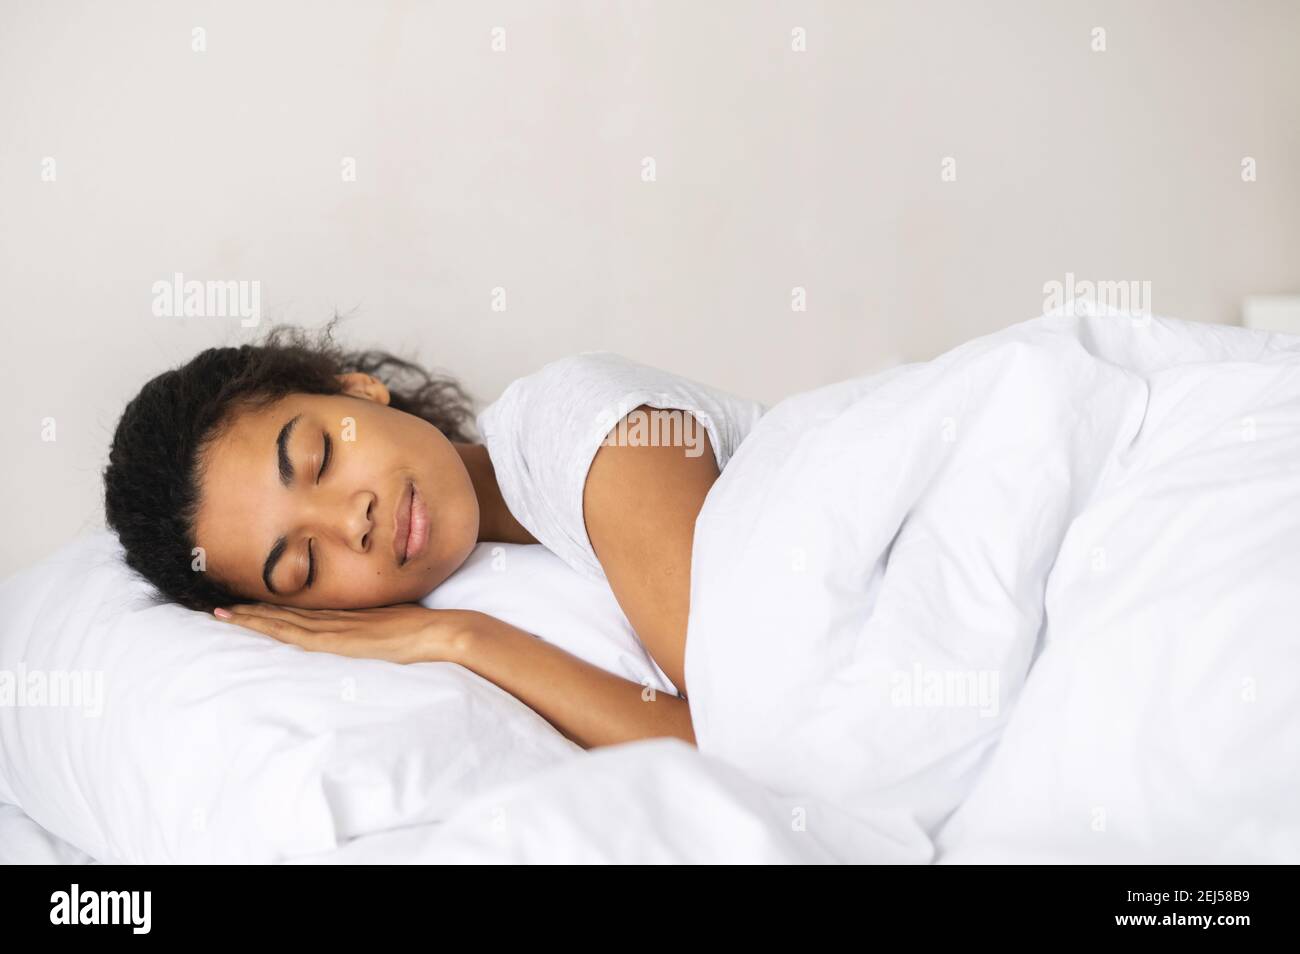 Peaceful girl sleeping well in cozy pure bed in the hotel on soft fresh pillow white linen mattress, enjoy sleep, side view, watching the dreams Stock Photo